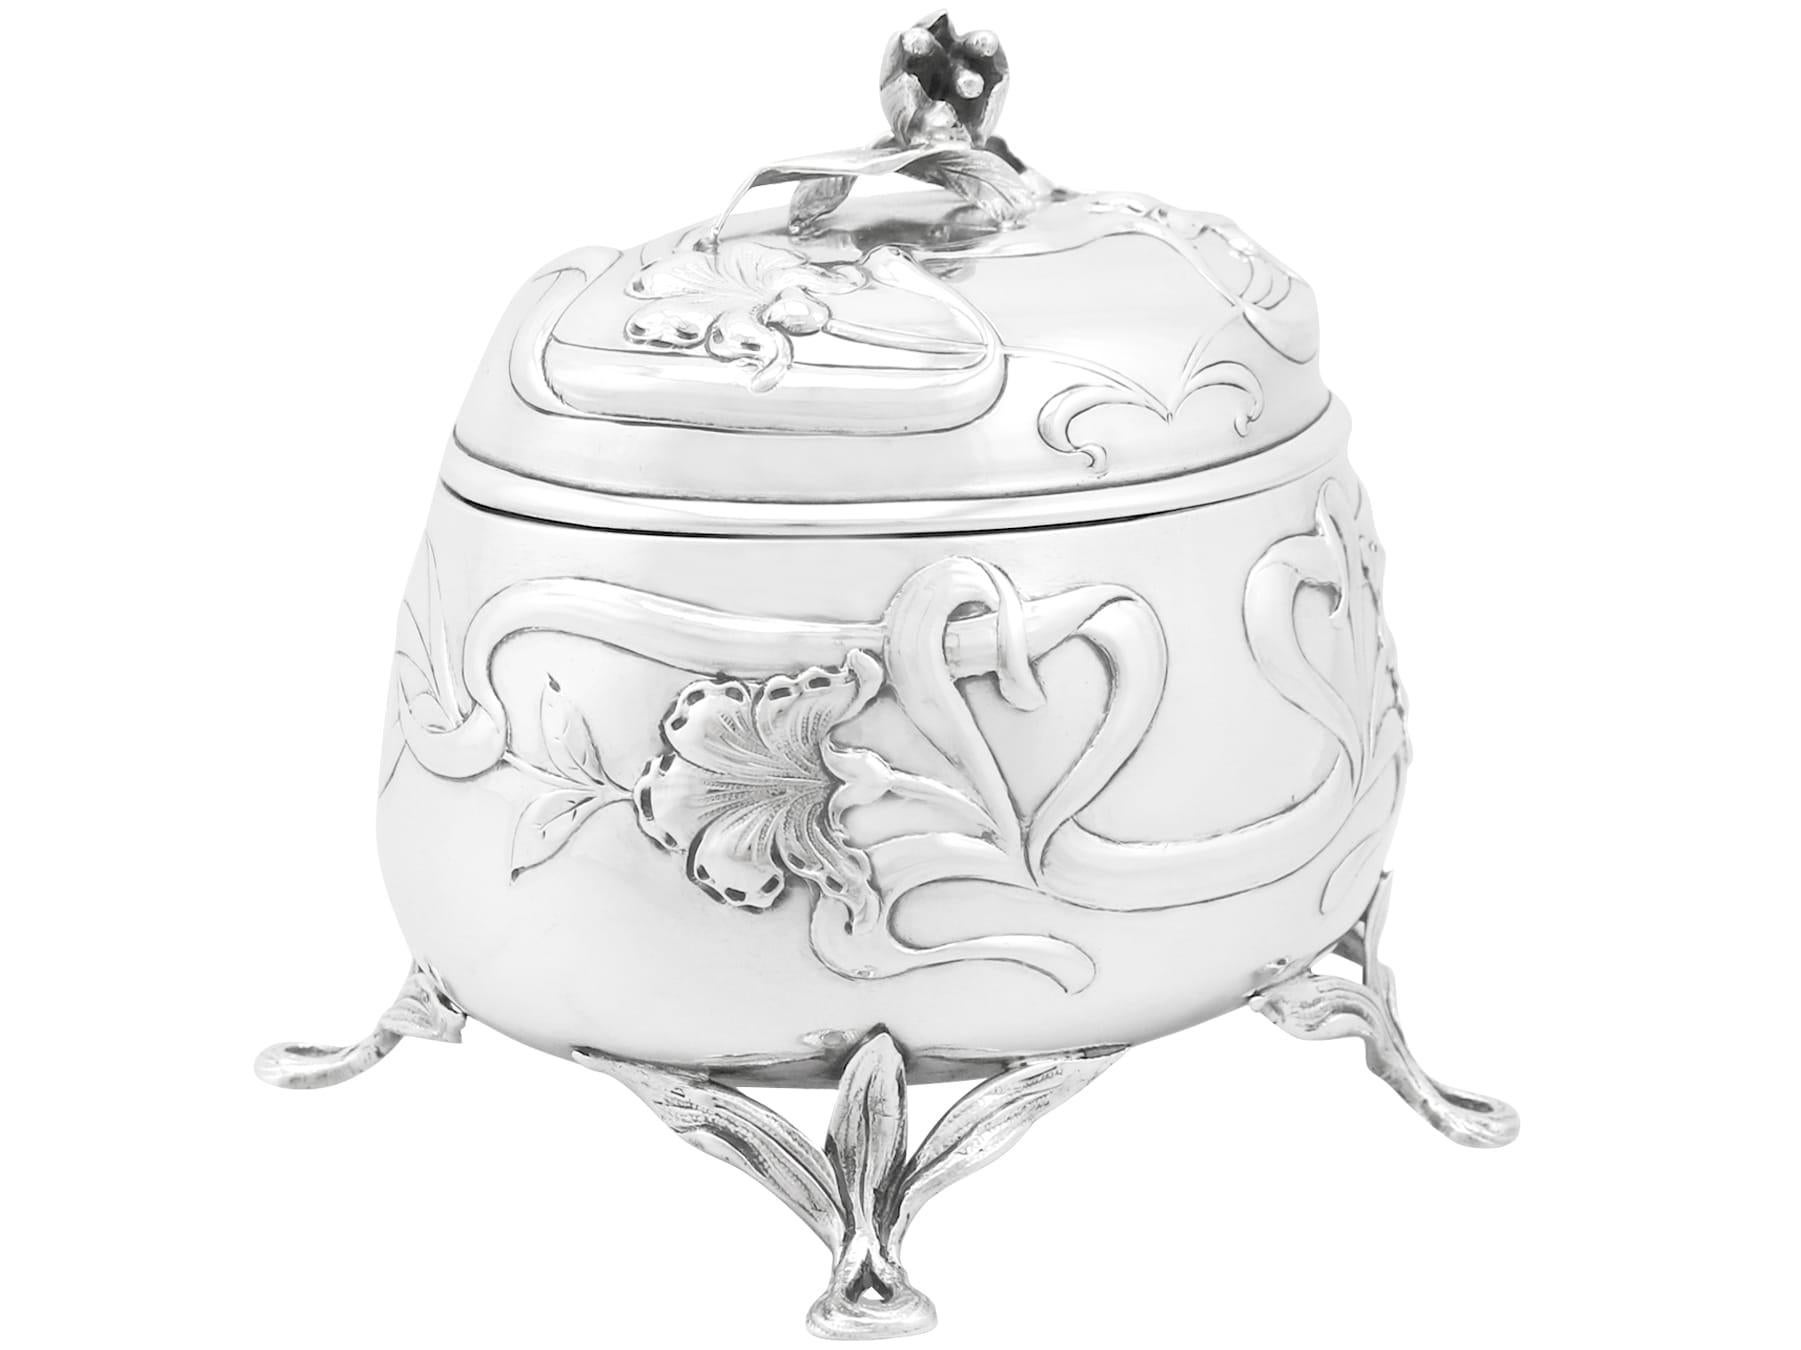 An exceptional, fine and impressive antique Austro-Hungarian 800 standard silver tea caddy in the Art Nouveau style; an addition to our silver teaware collection.

This exceptional Austro-Hungarian silver tea caddy has an oval rounded form.

The